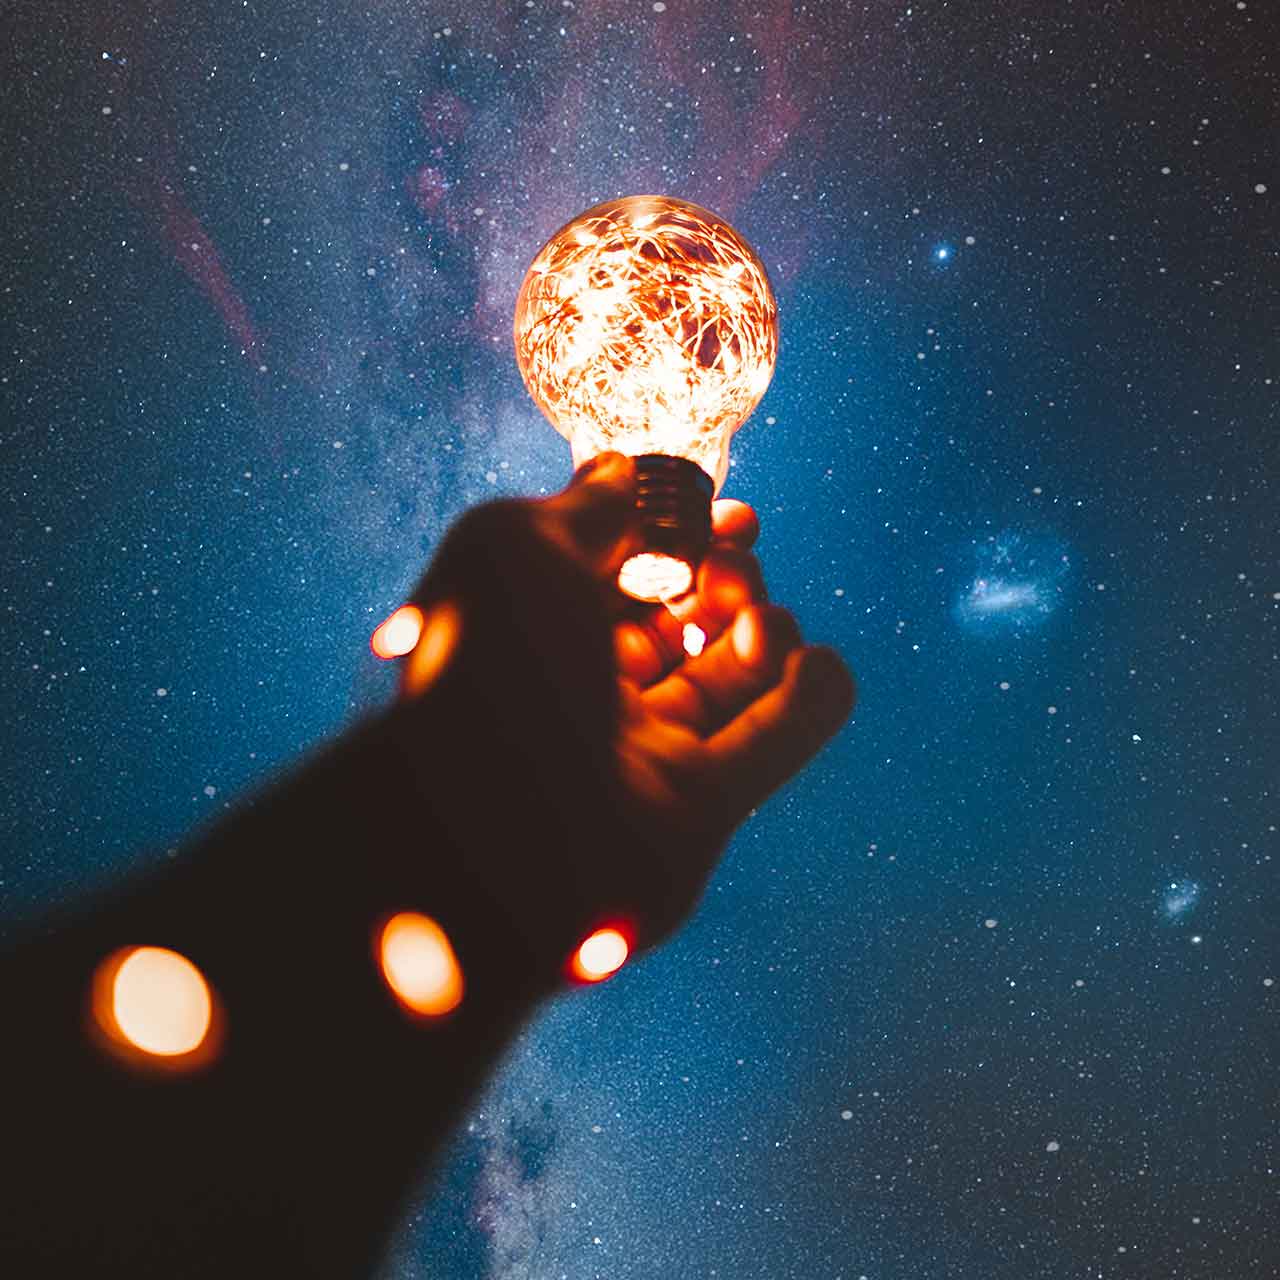 A hand holding a lightbulb with fairy lights up against the night sky with the milkyway visible